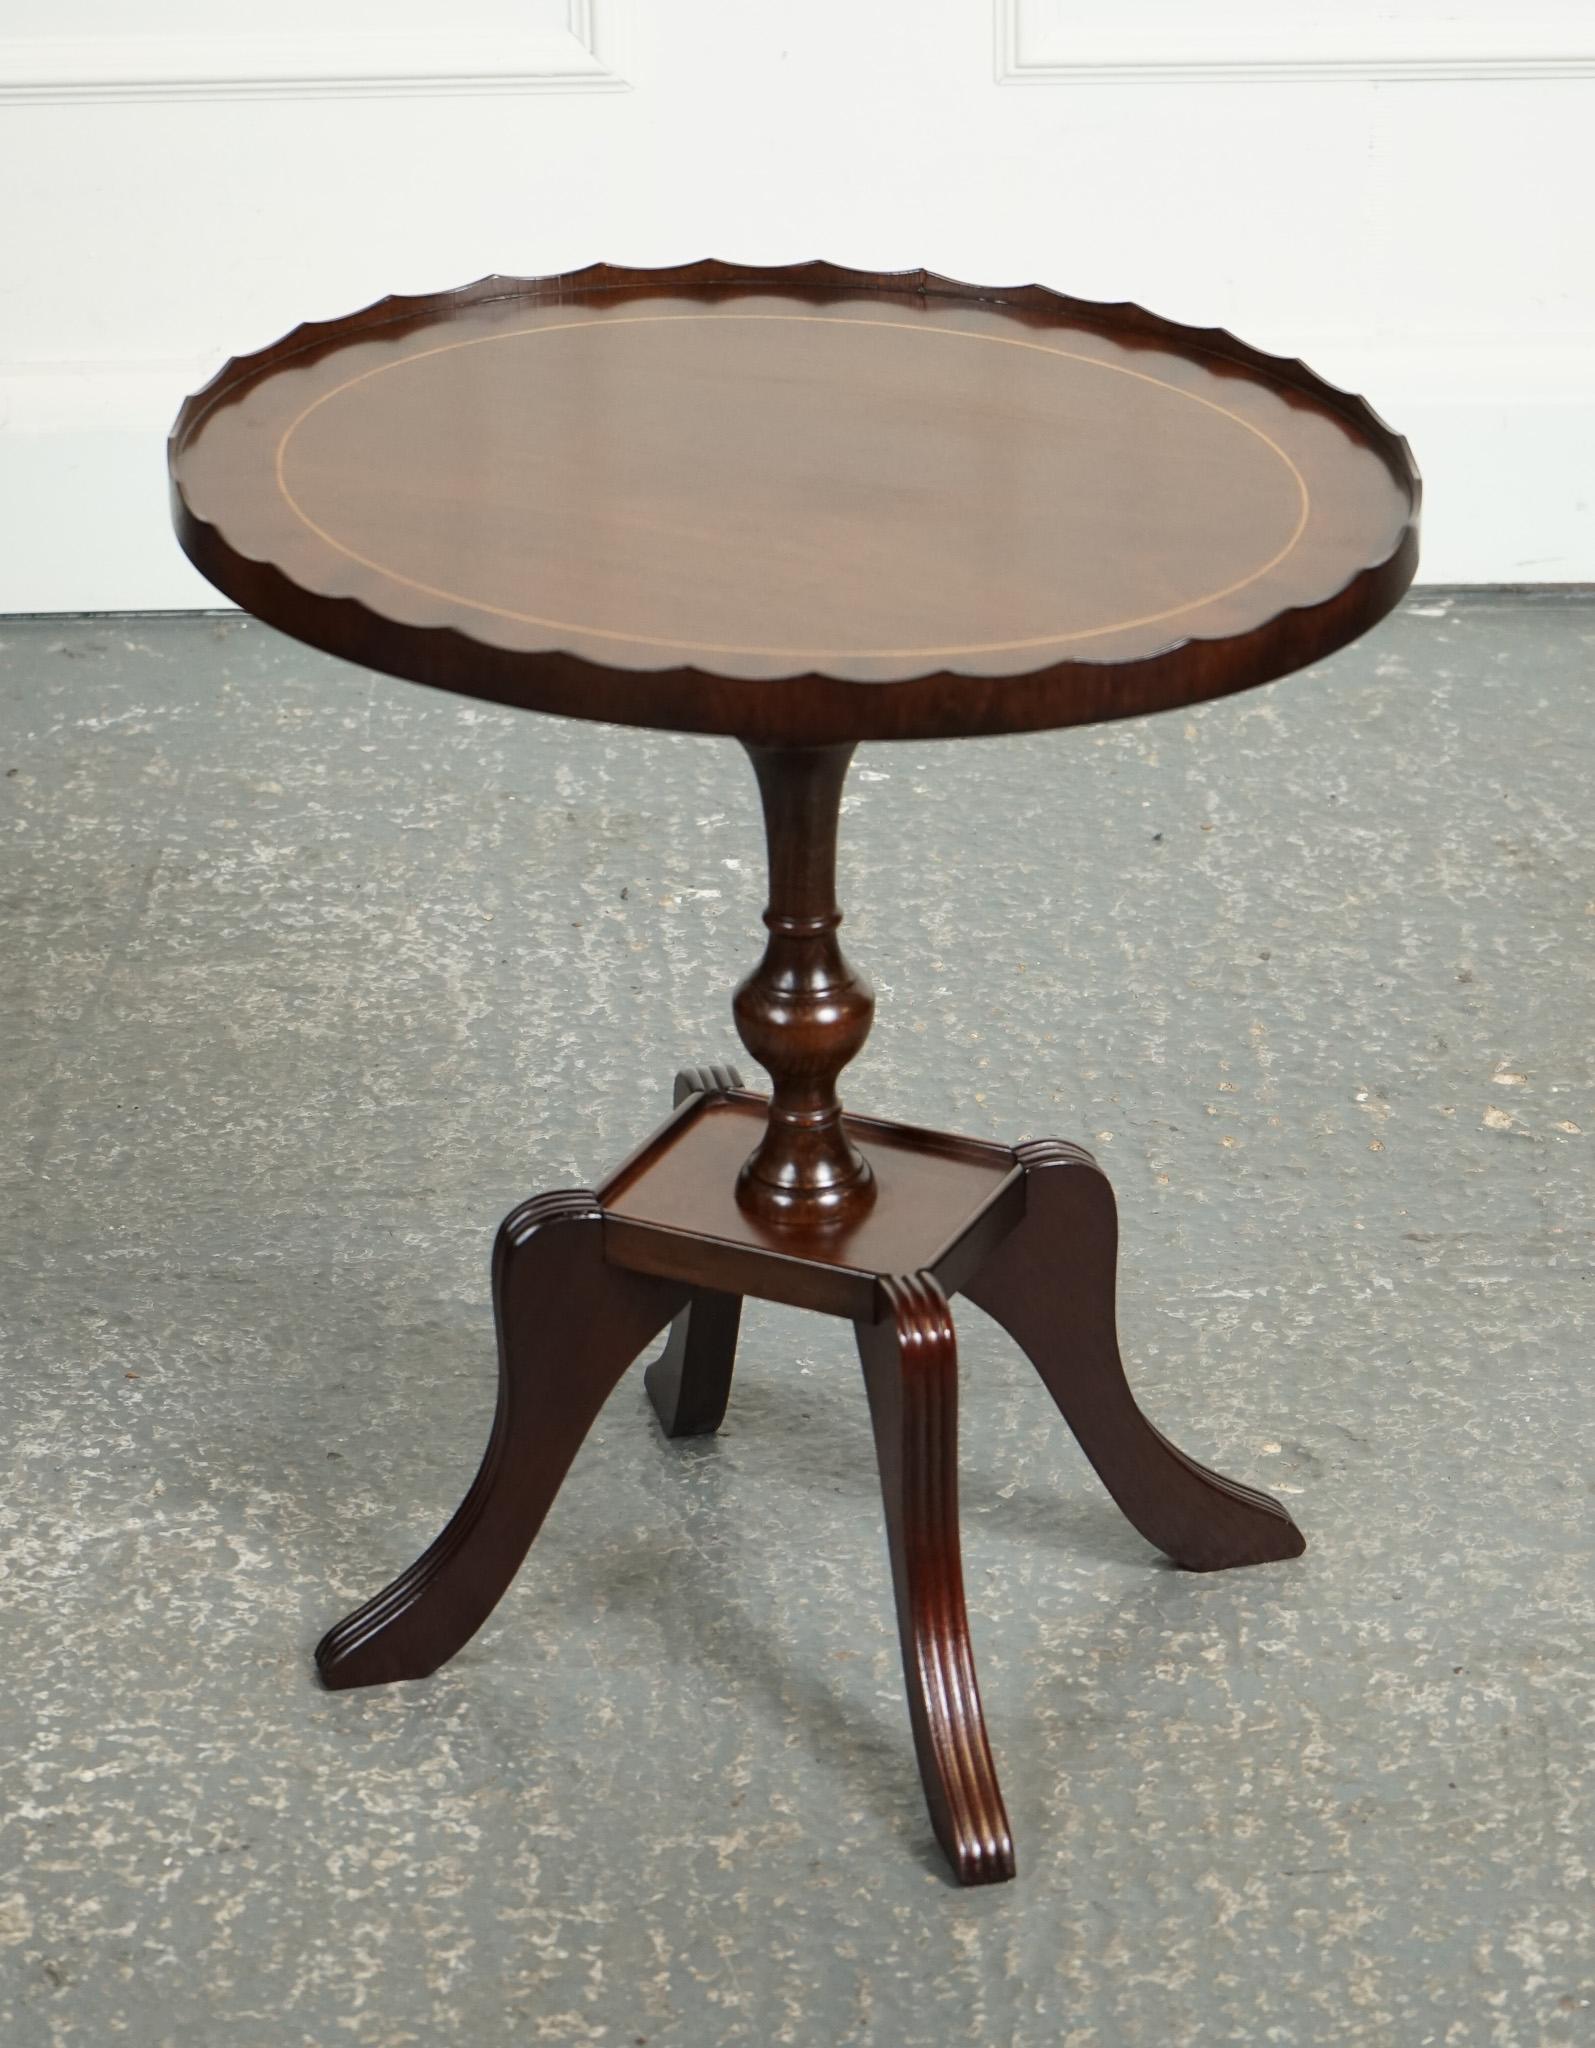 
We are delighted to offer for sale this flamed hardwood oval pie crust side table is a stylish and elegant piece of furniture typically crafted from high-quality hardwood.

The table features a unique oval shape with a decorative pie crust edge